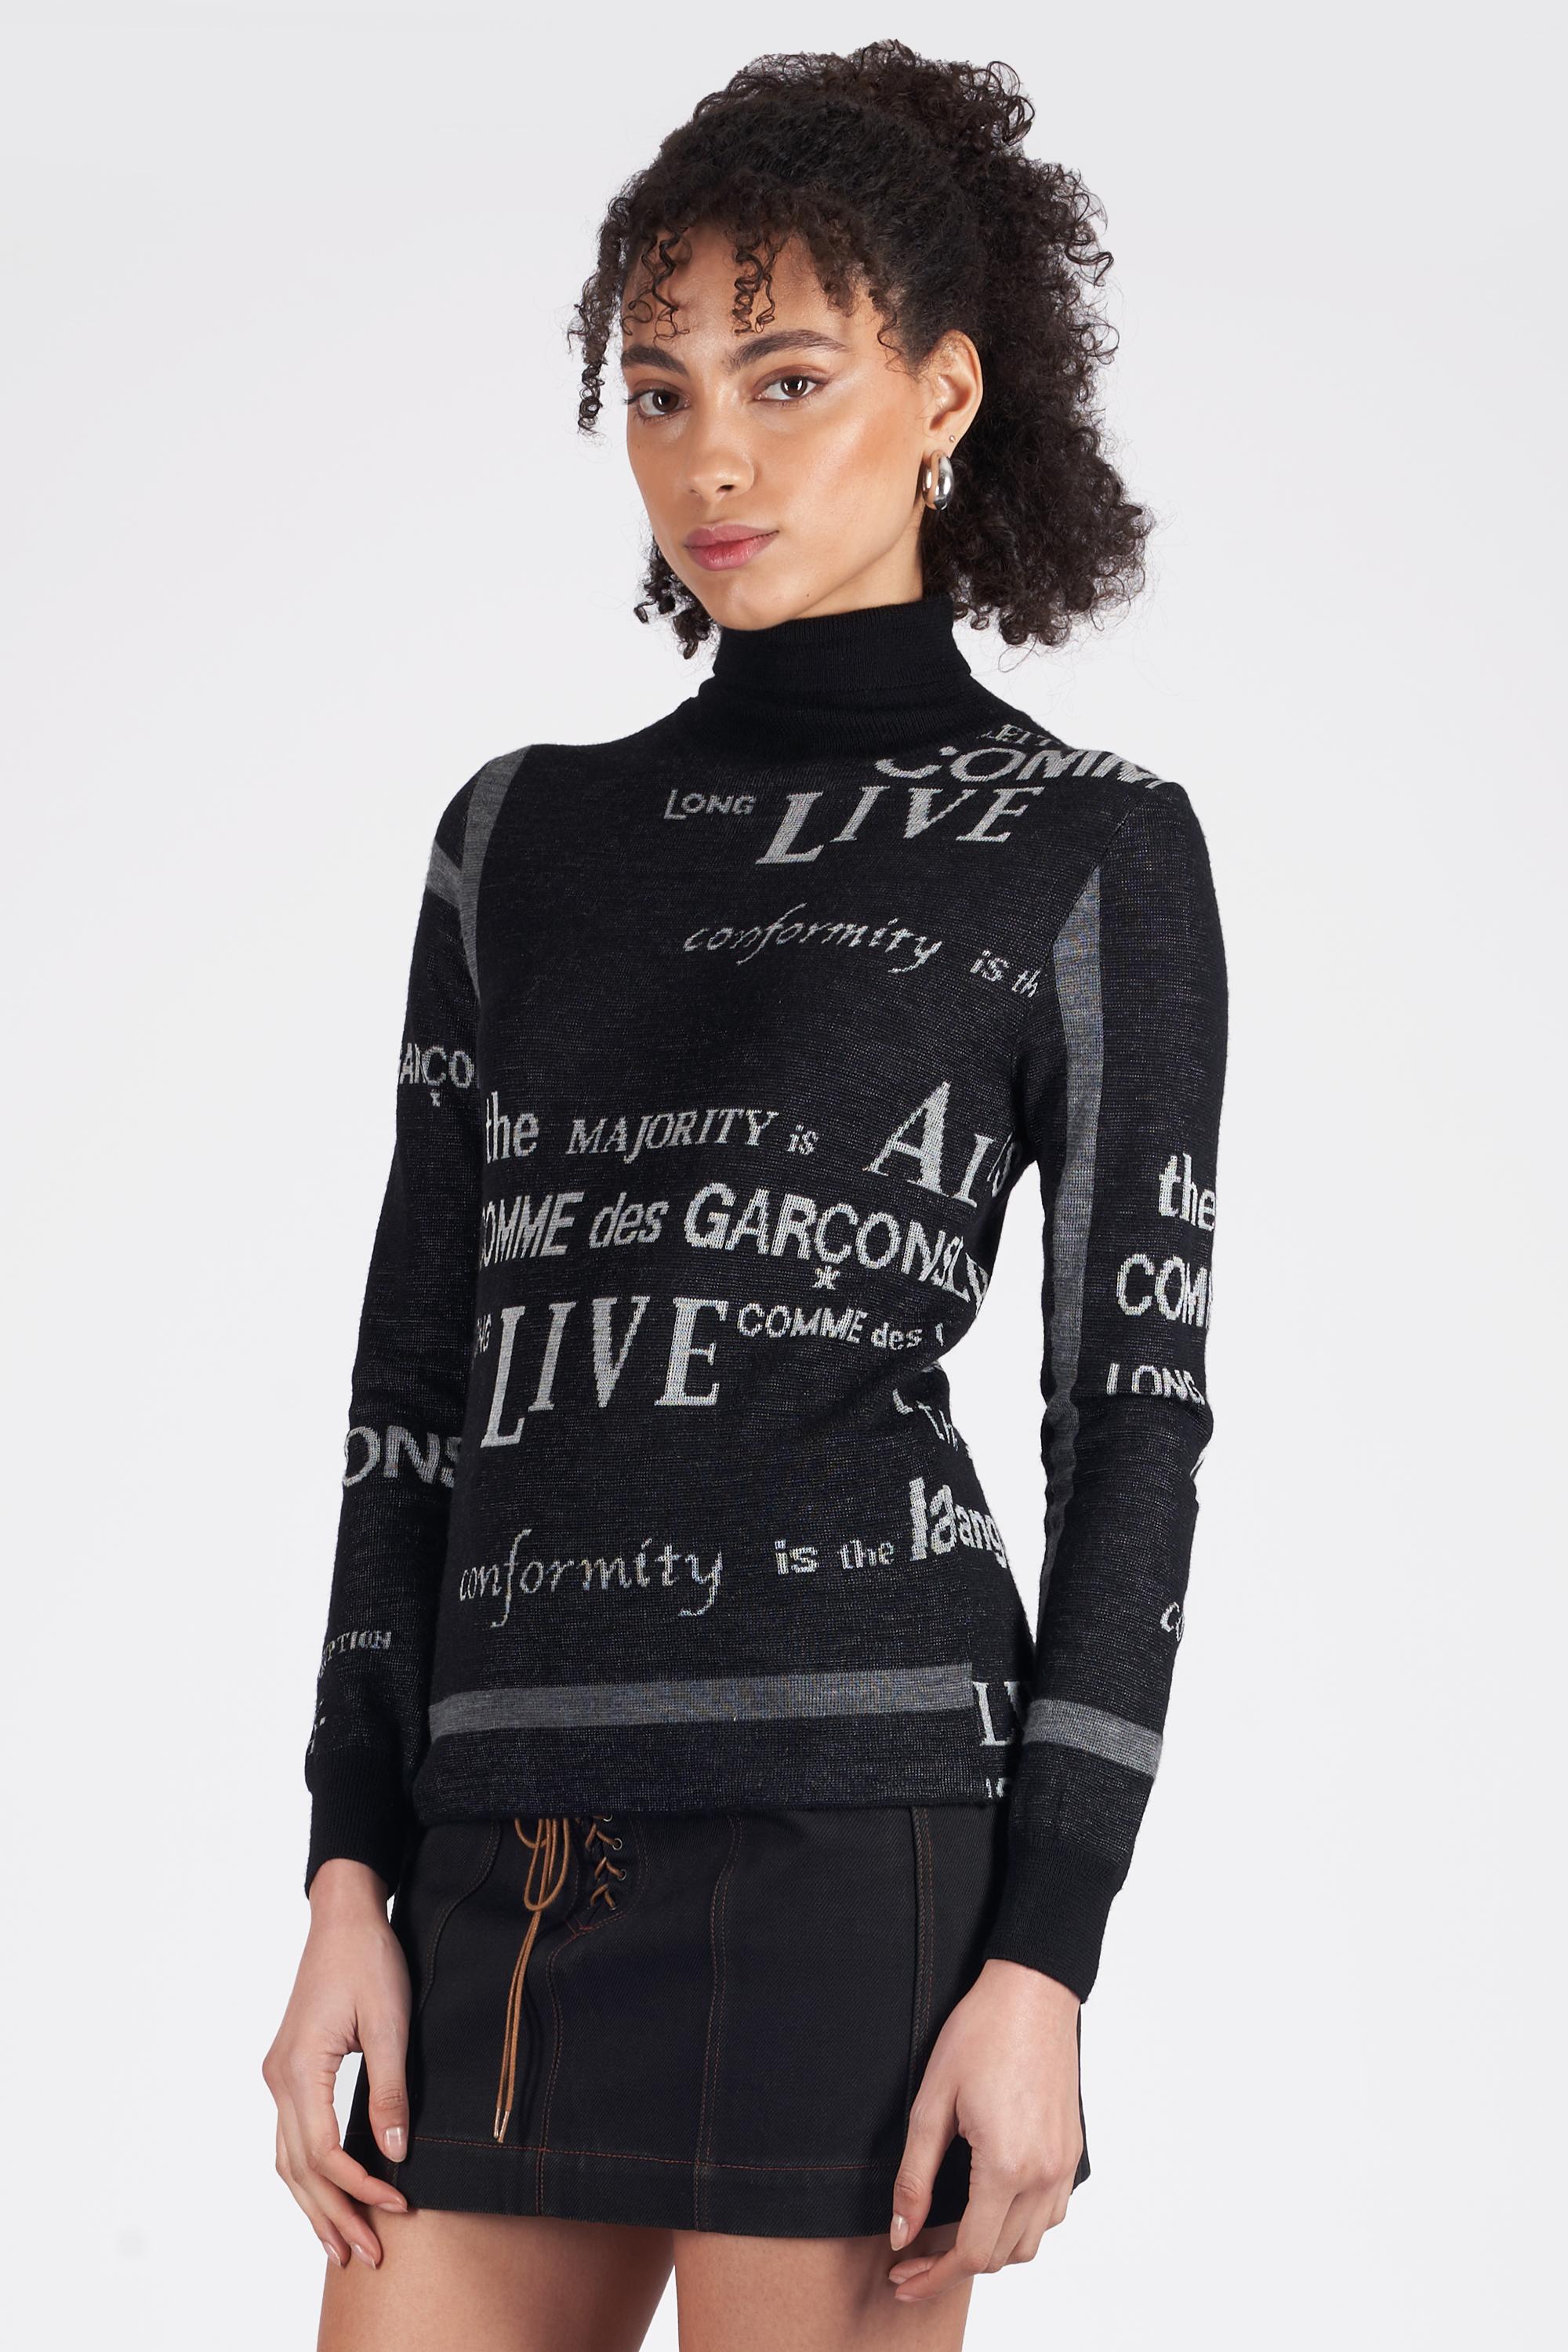 We are excited to present this Comme Des Garçons 2003 black and grey turtleneck. Features a spell out detail all over. In excellent vintage condition. Authenticity guaranteed.

Label size: N/A / Modern Size UK 8
Modern size: UK: 6 to 10, US: 4 to 8,